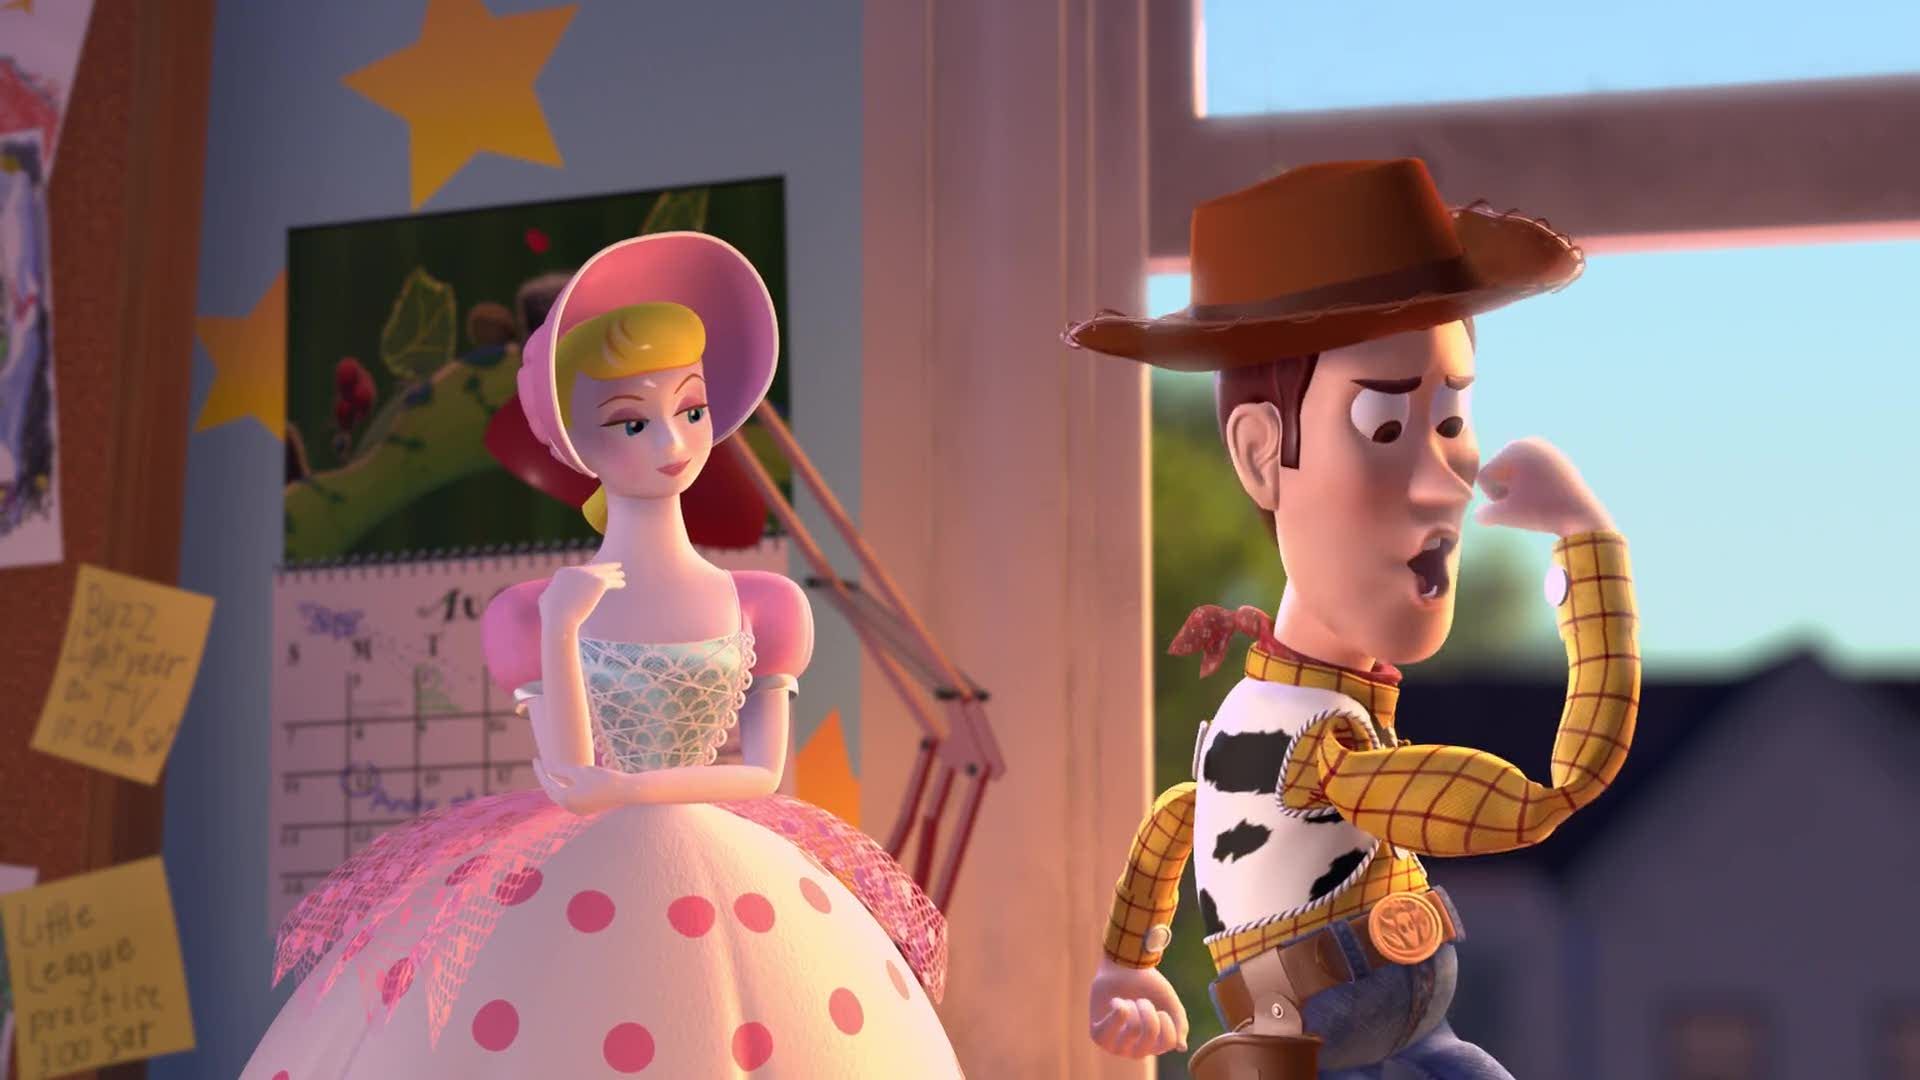 Toy Story 4 a Love Story Between Woody and Bo Peep | Collider